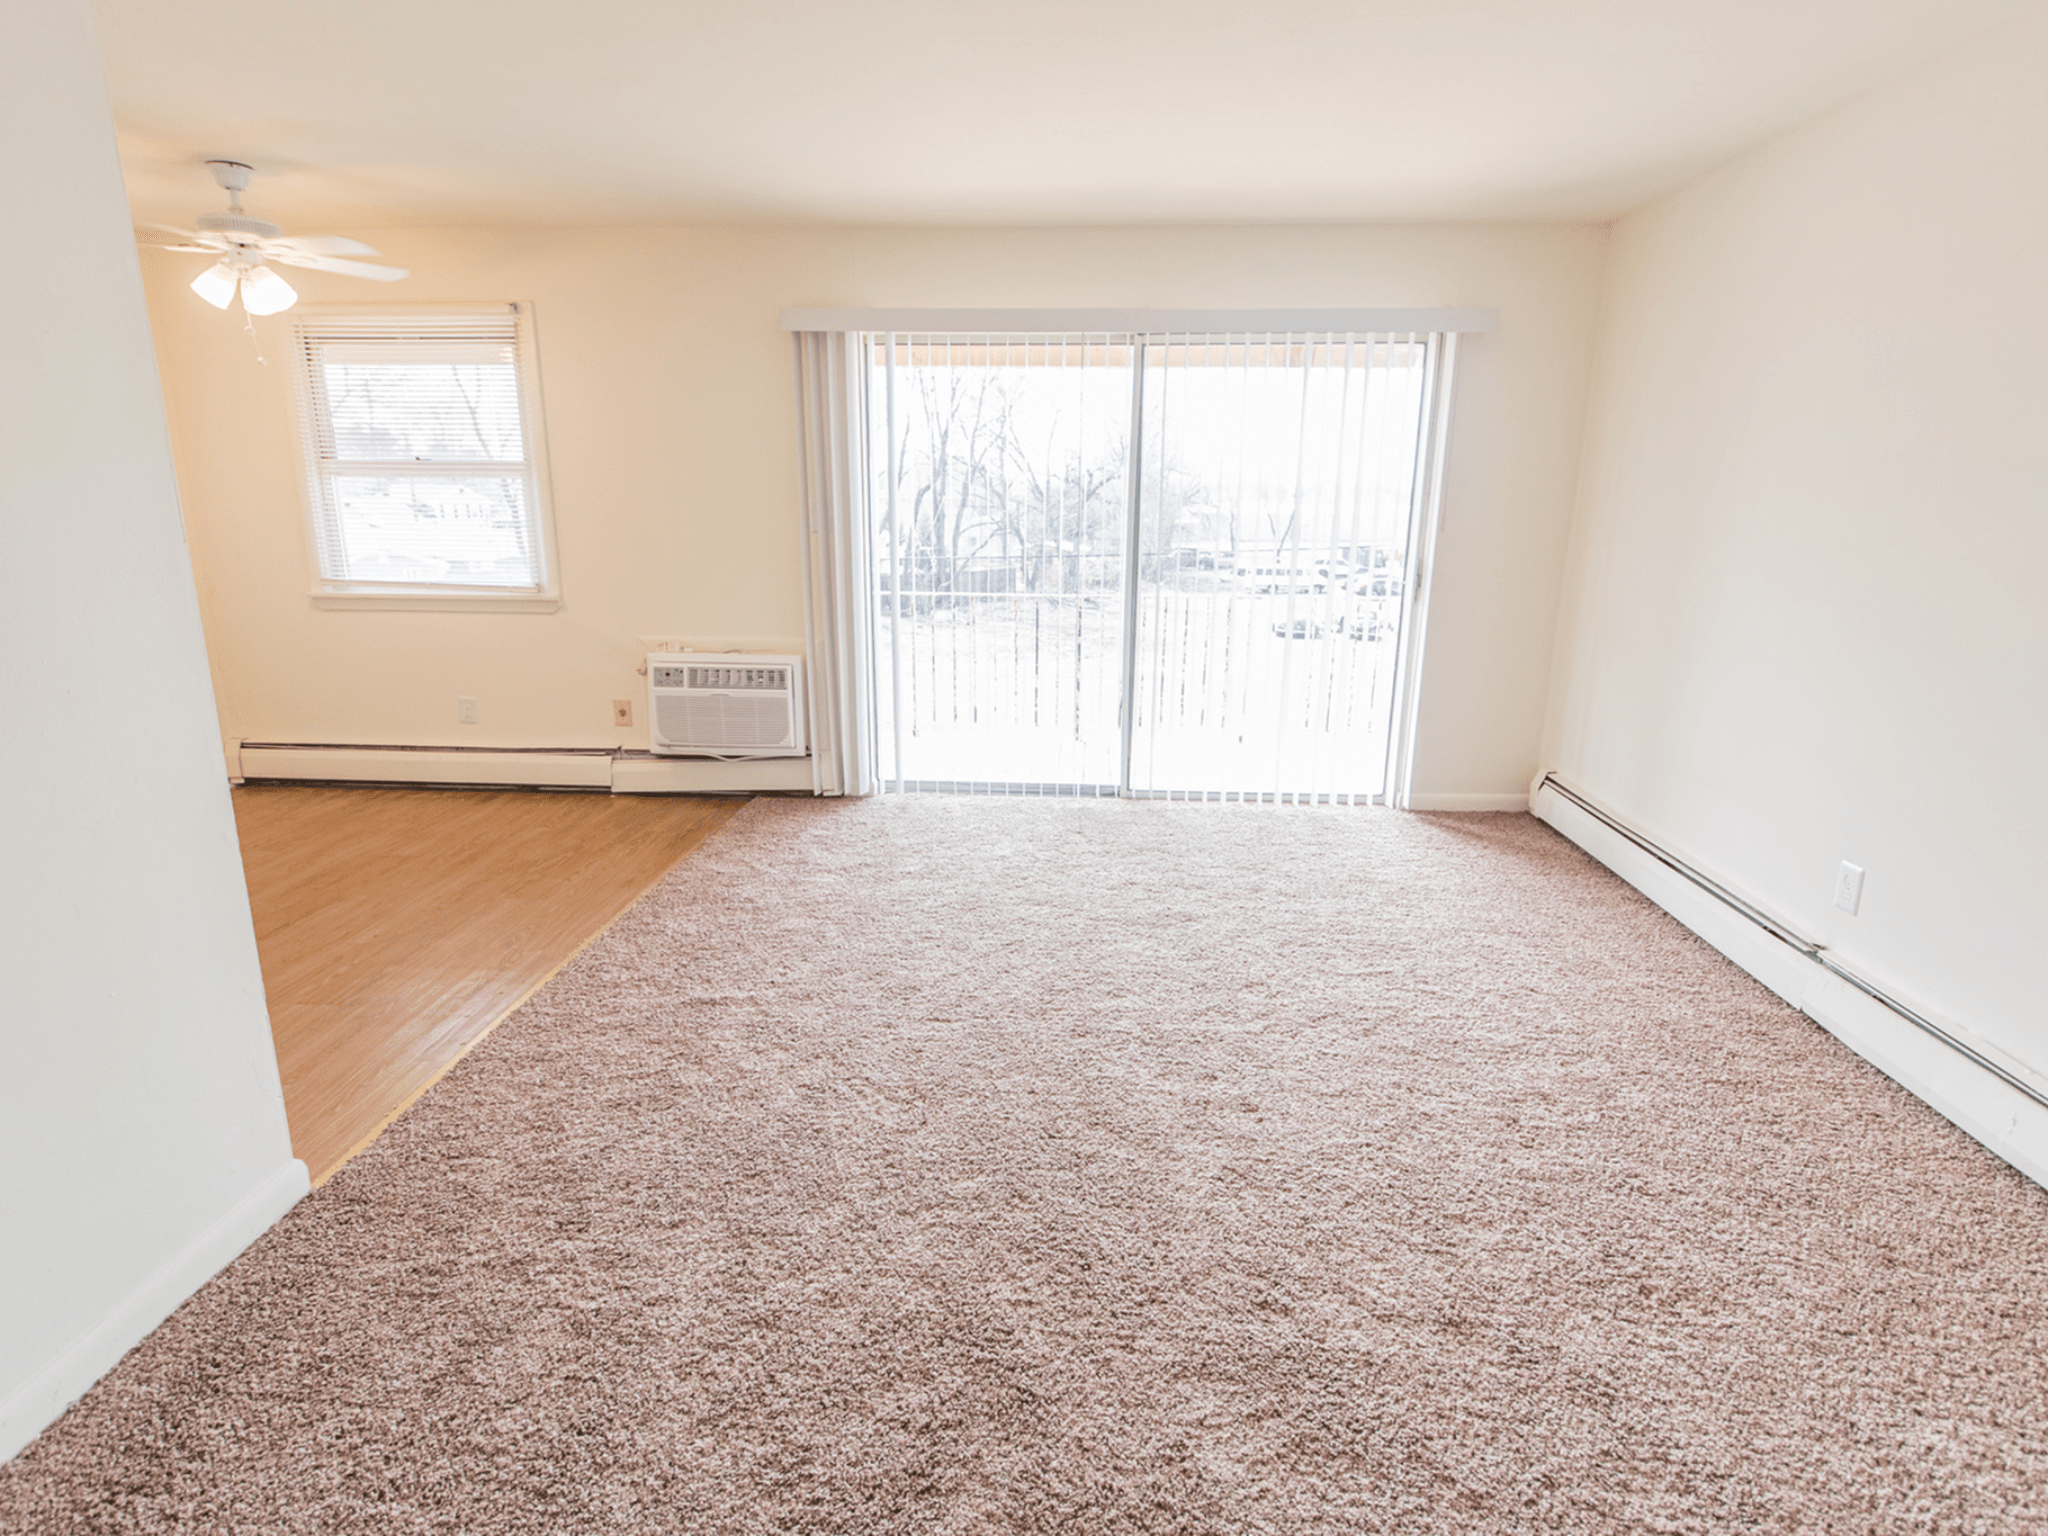 Carpeted living room with a door to the balcony at Polo Ridge Apartments